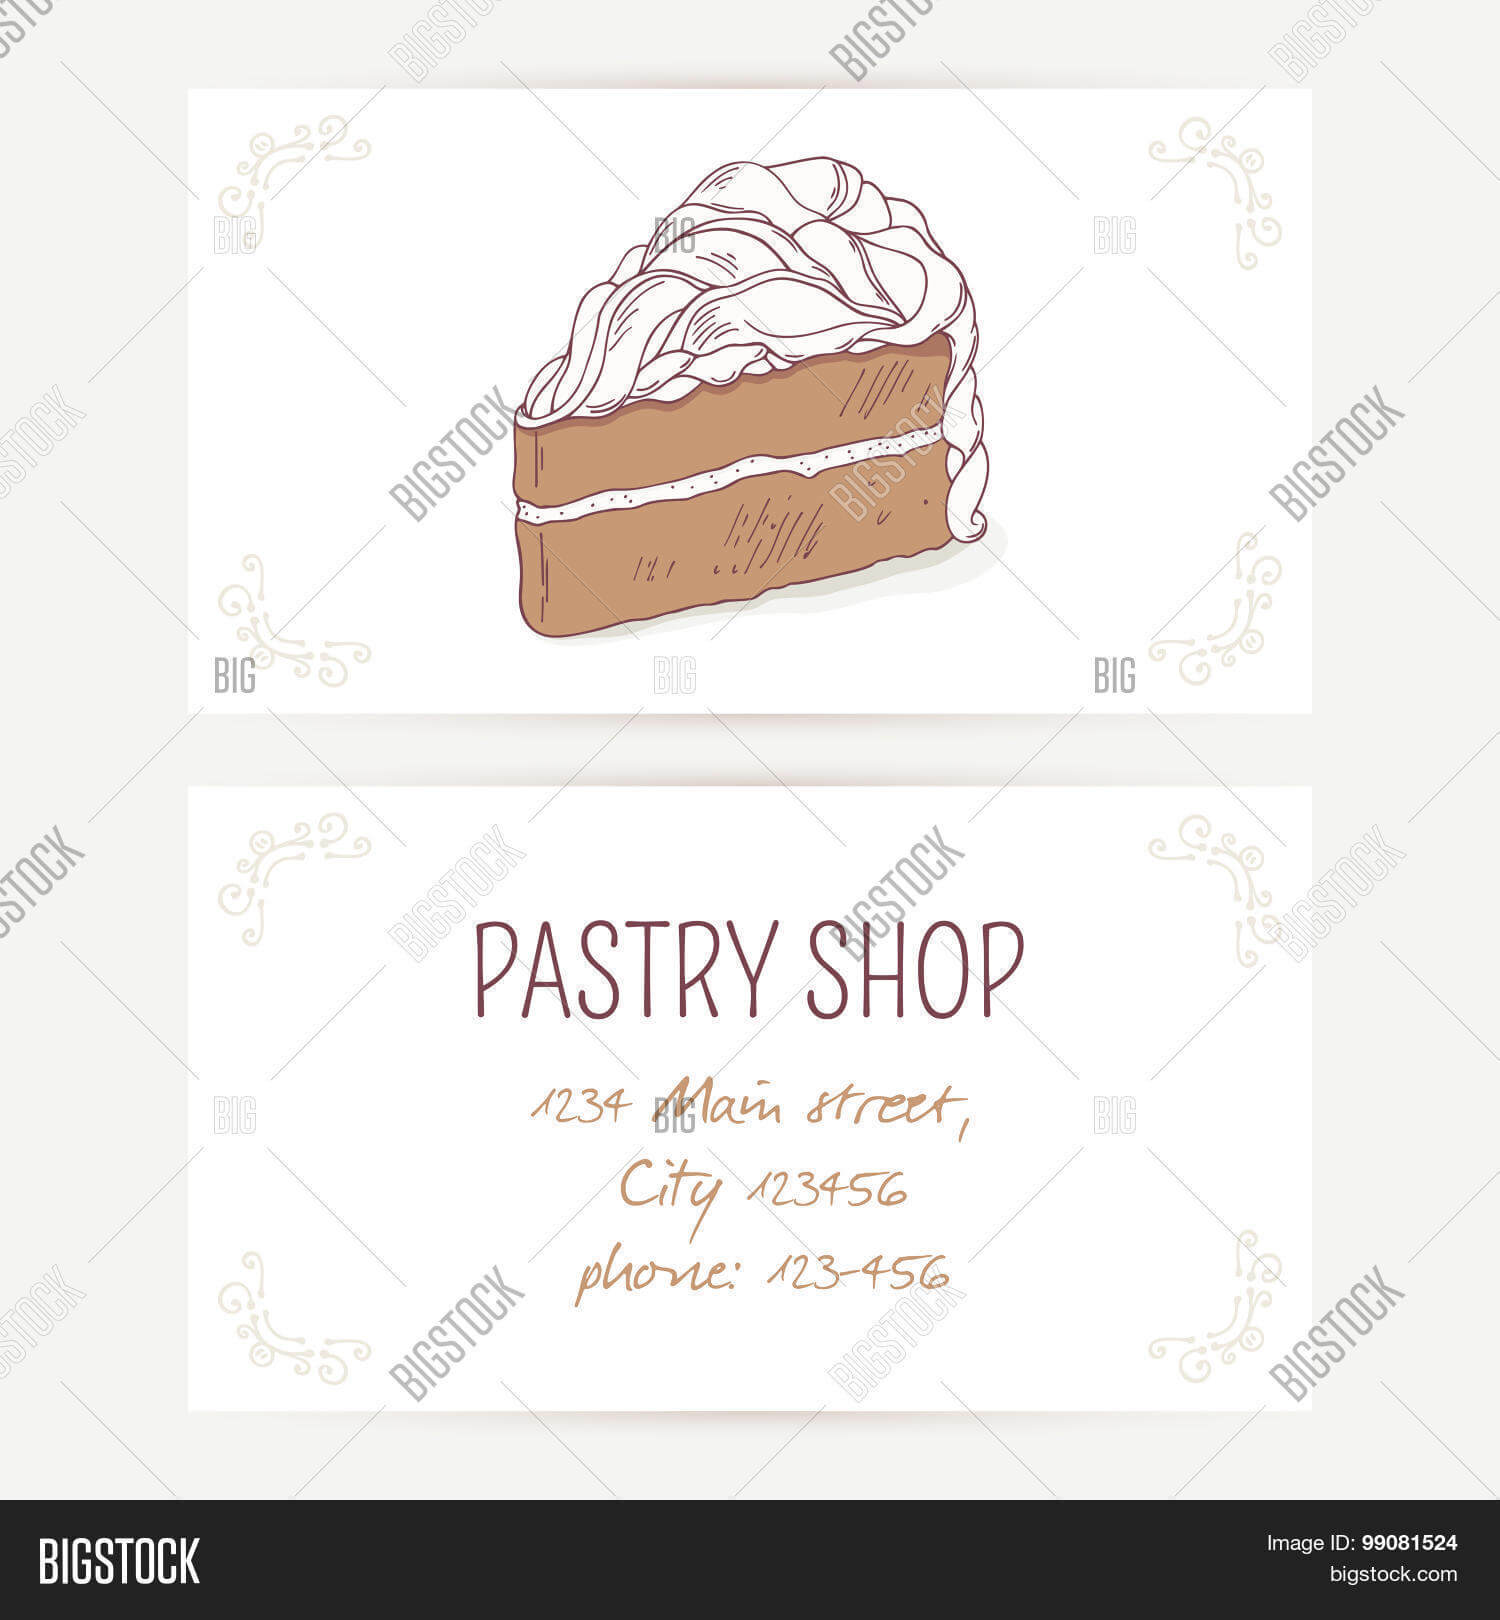 Business Card Vector & Photo (Free Trial) | Bigstock For Cake Business Cards Templates Free